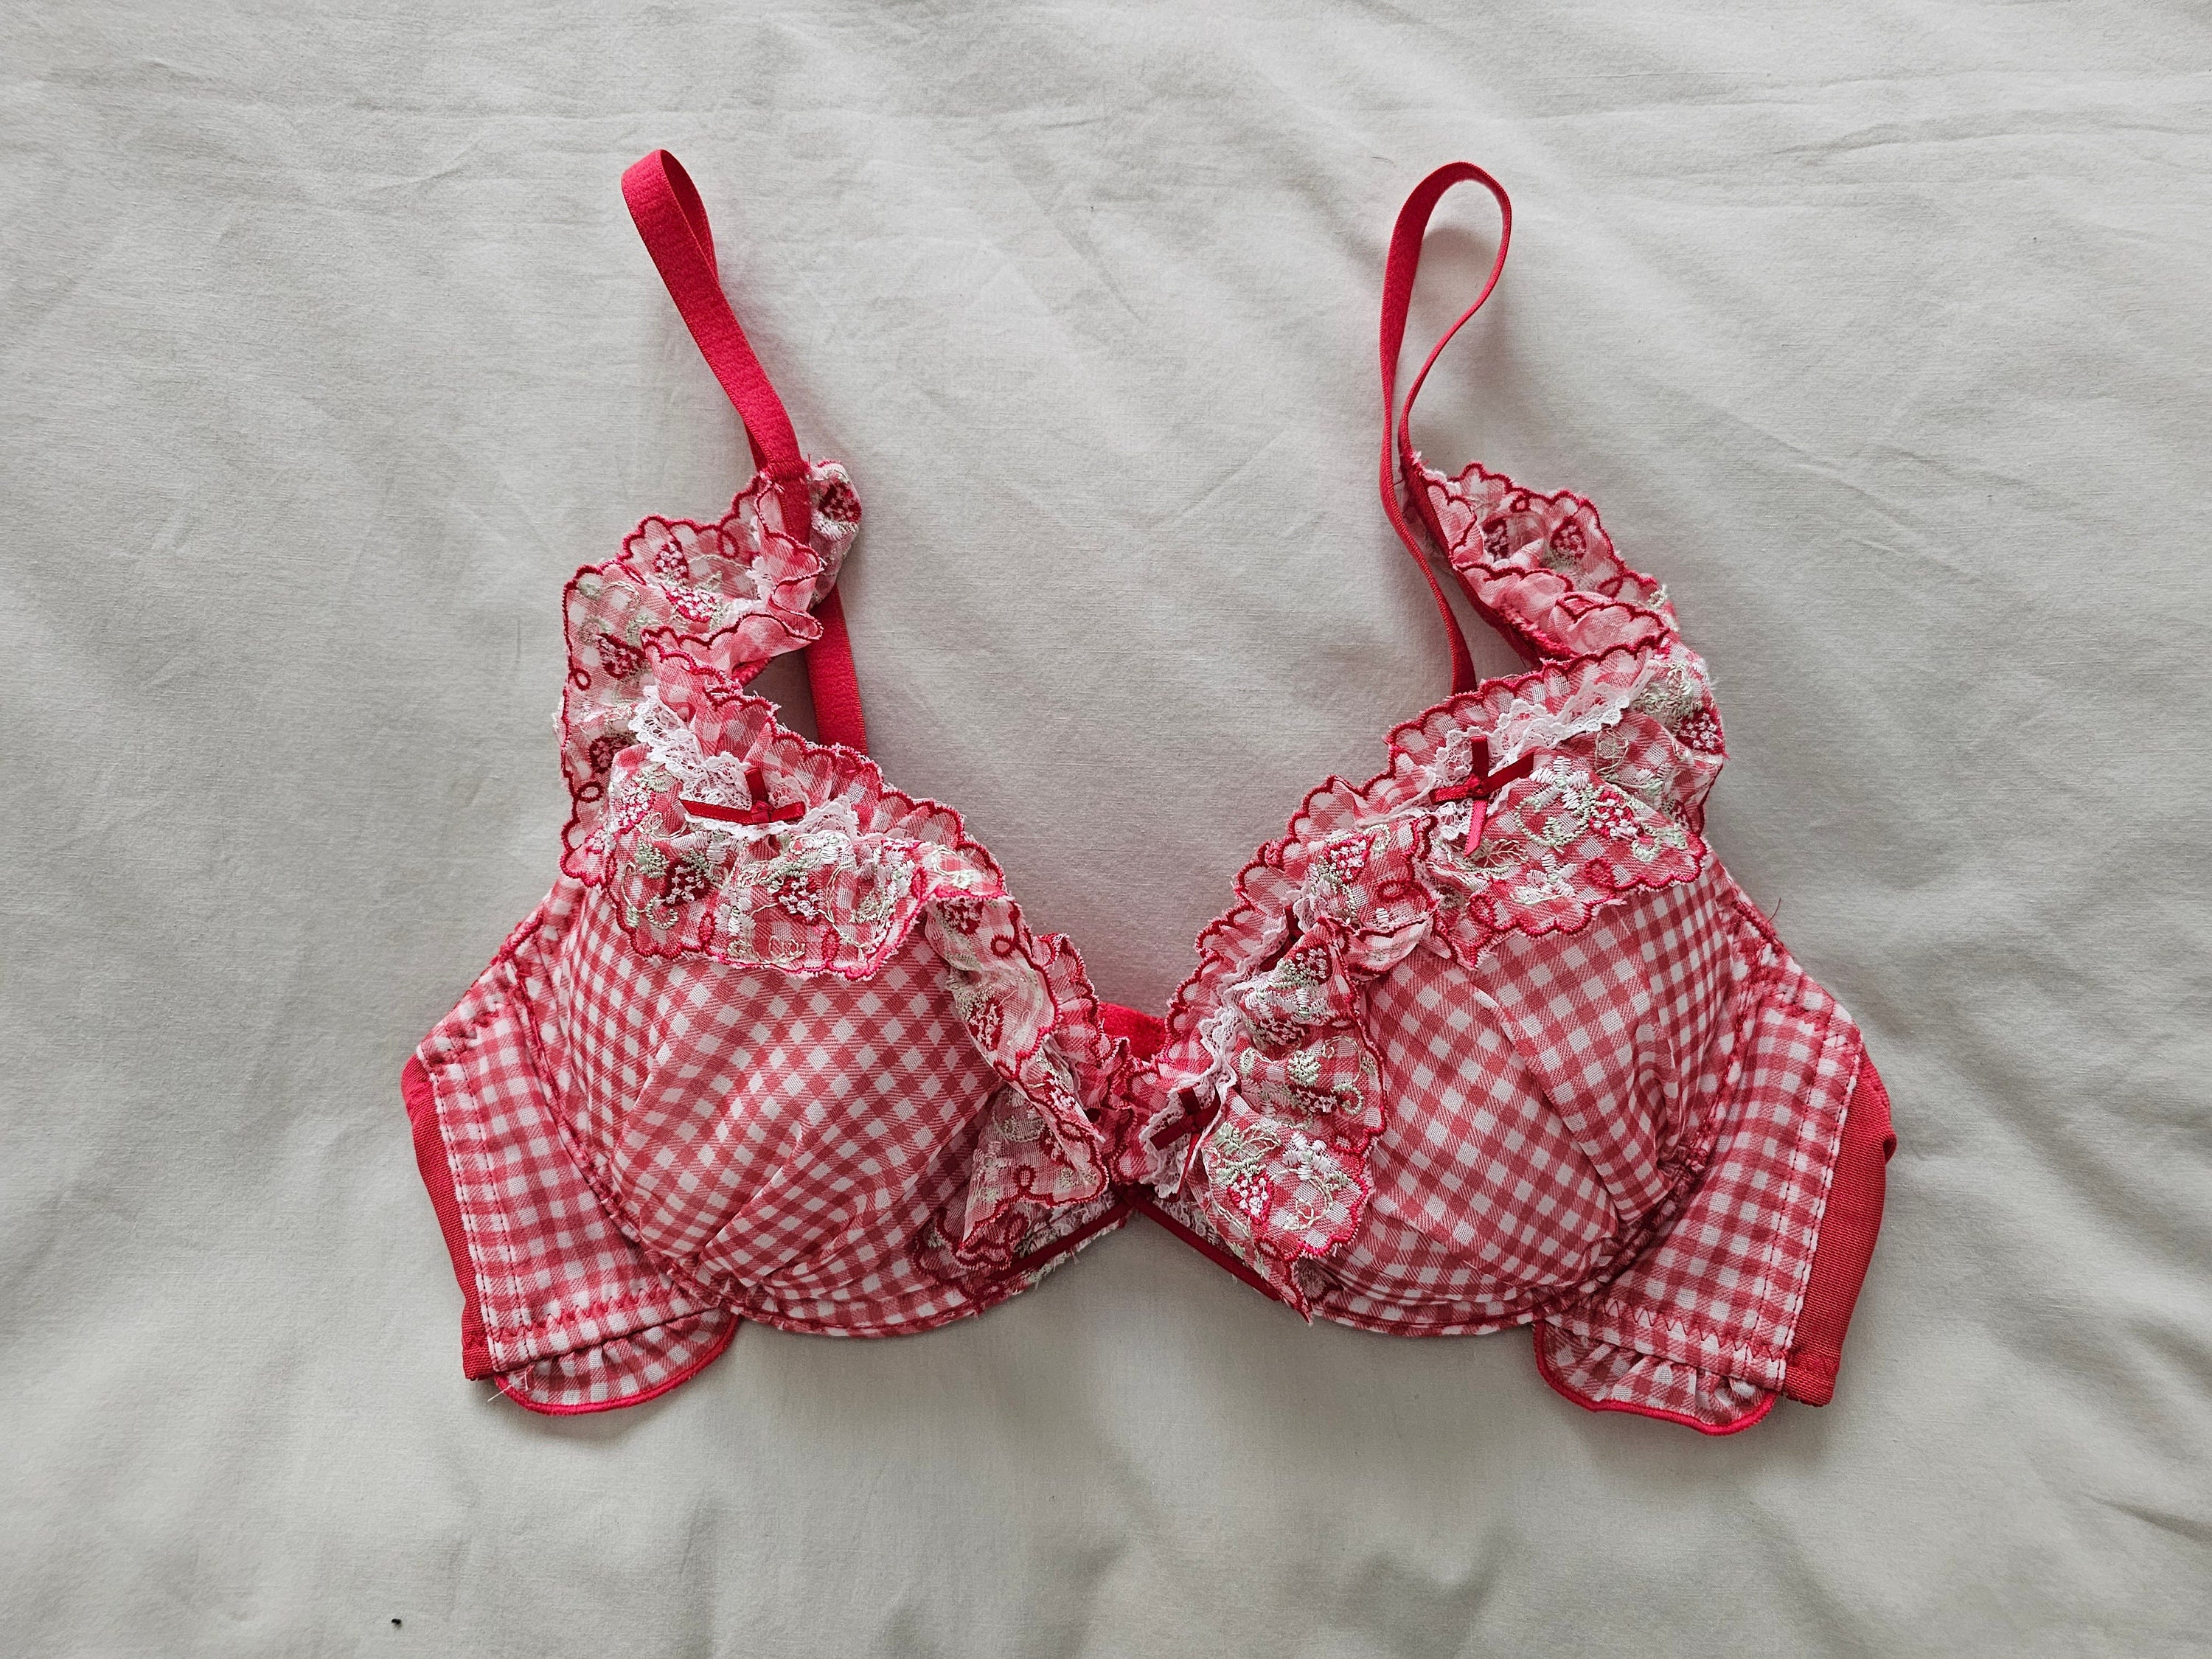 Vintage New Old Stock Bra From Japan size 16D Aus & 38D UK/US